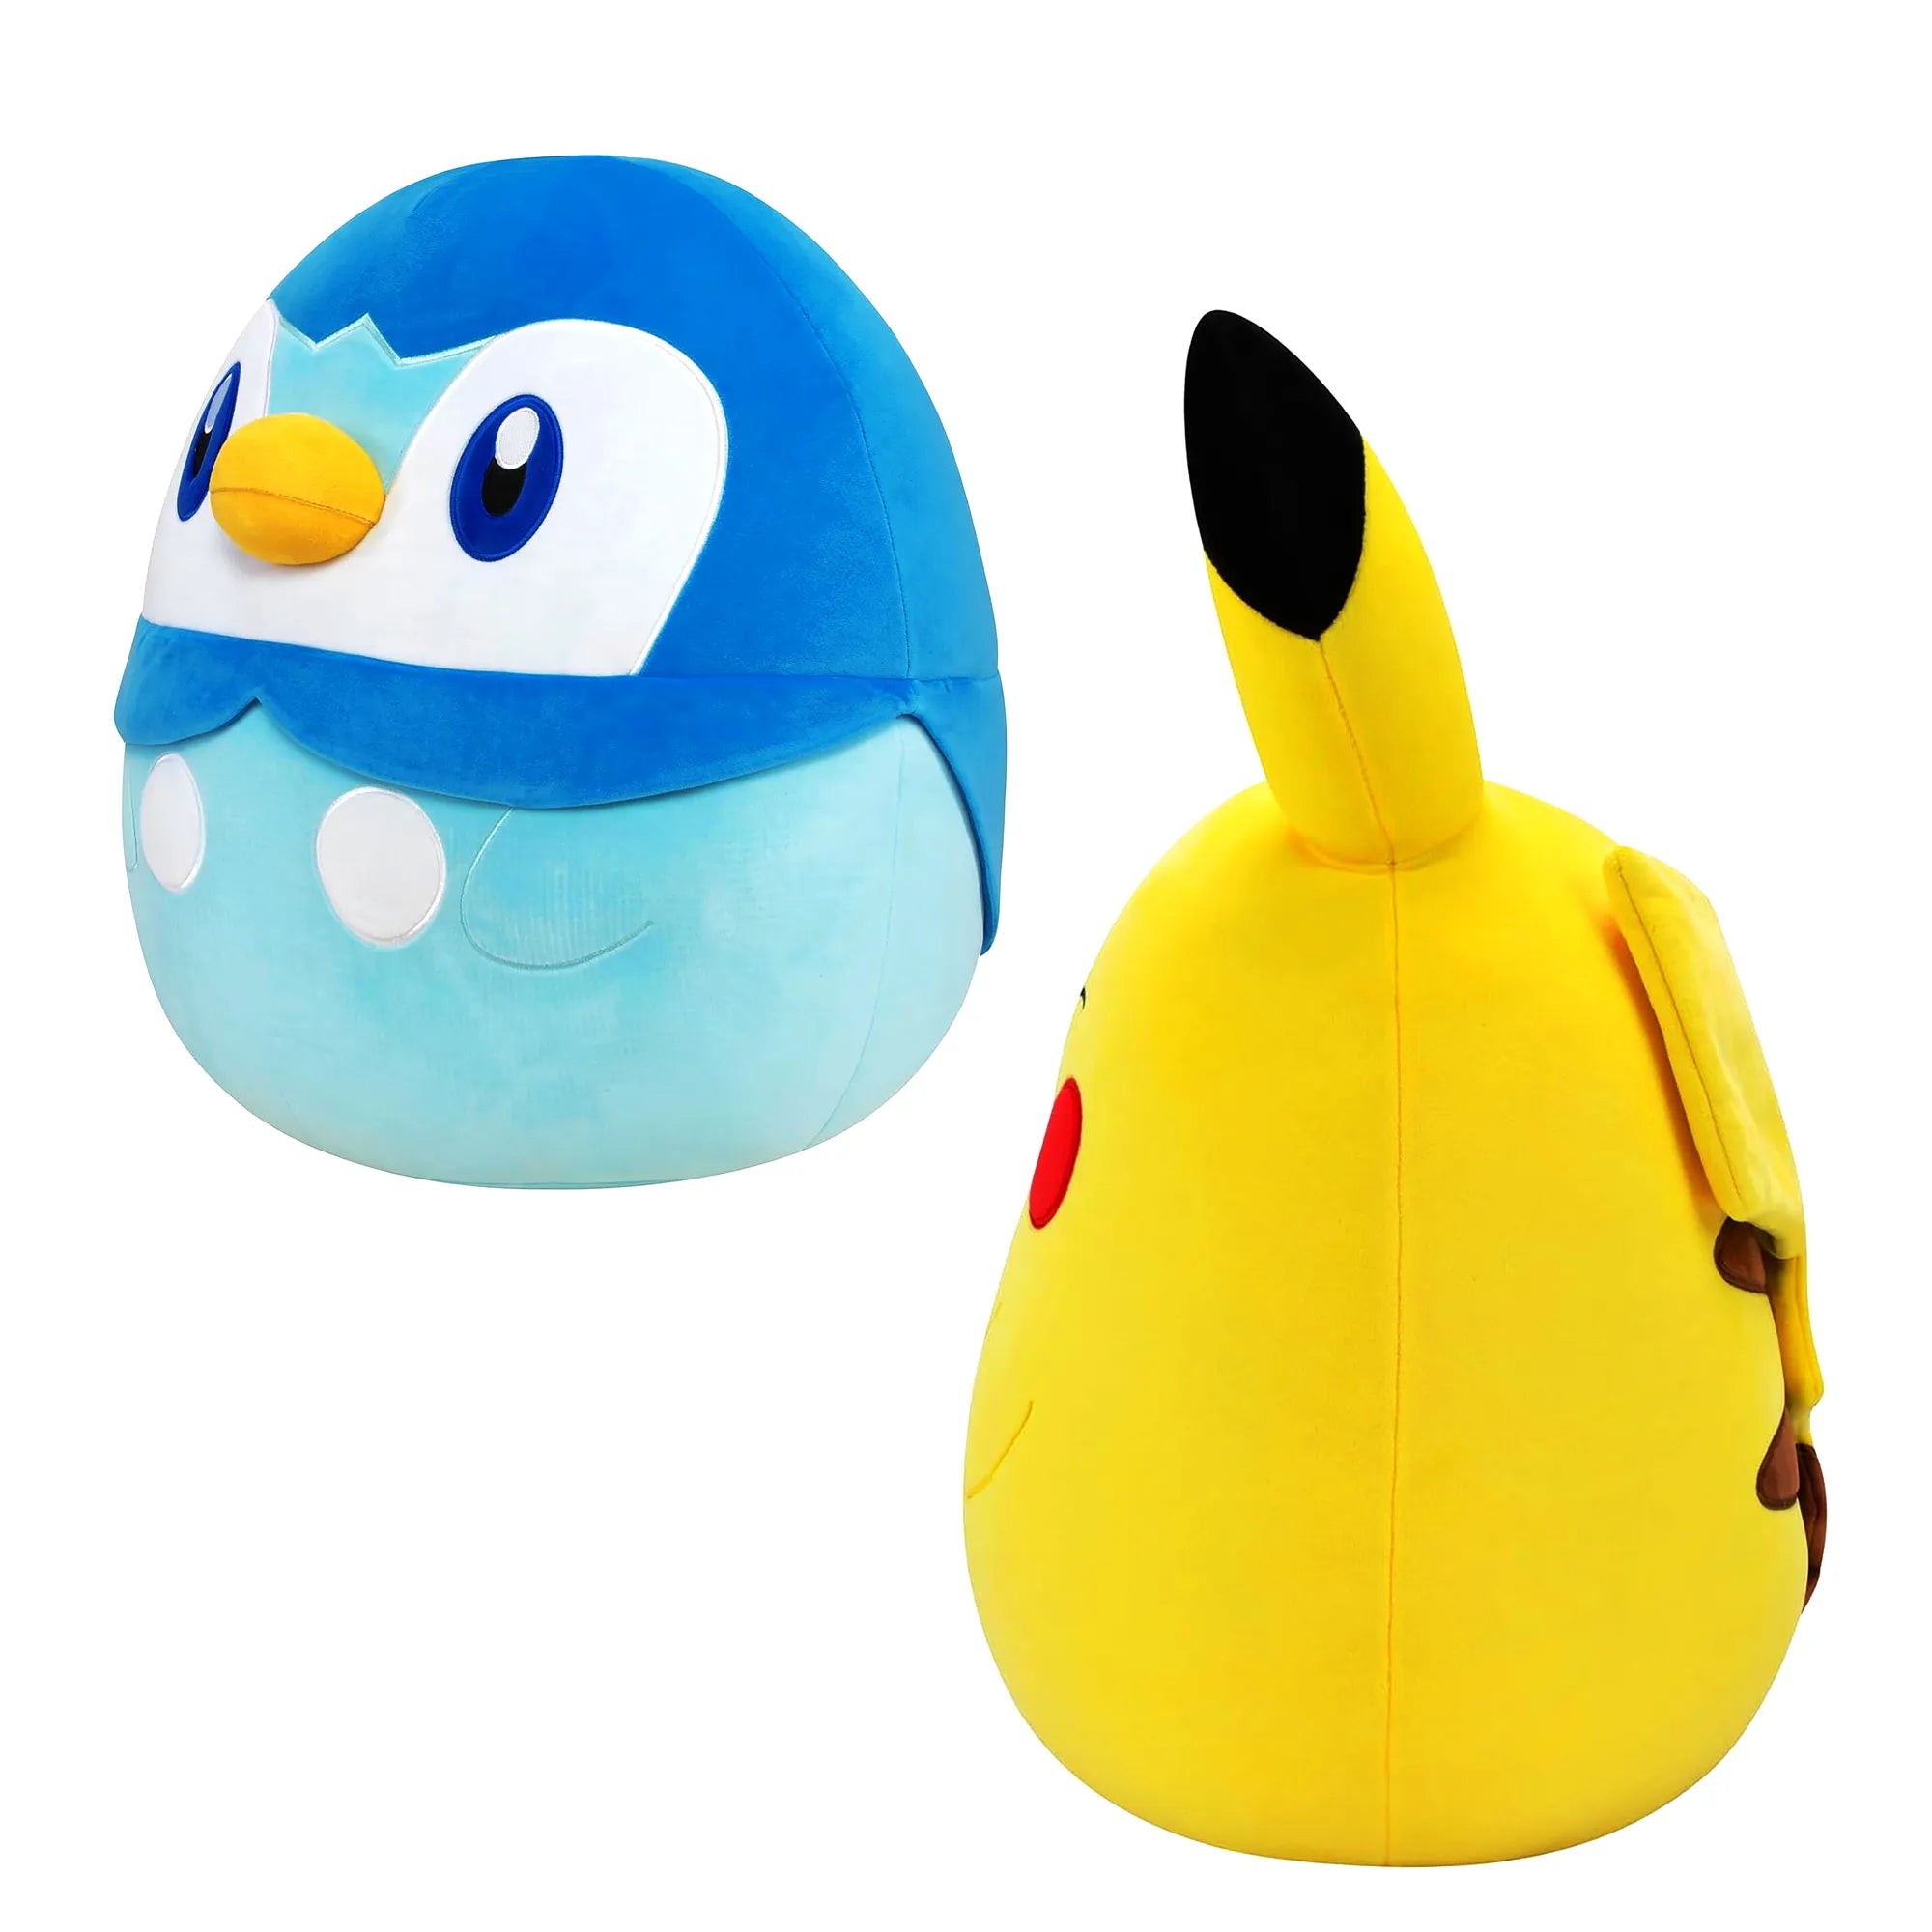 Squishmallows 10" Pikachu & Piplup Bundle - Age 3+ - Brown's Hobby & Game